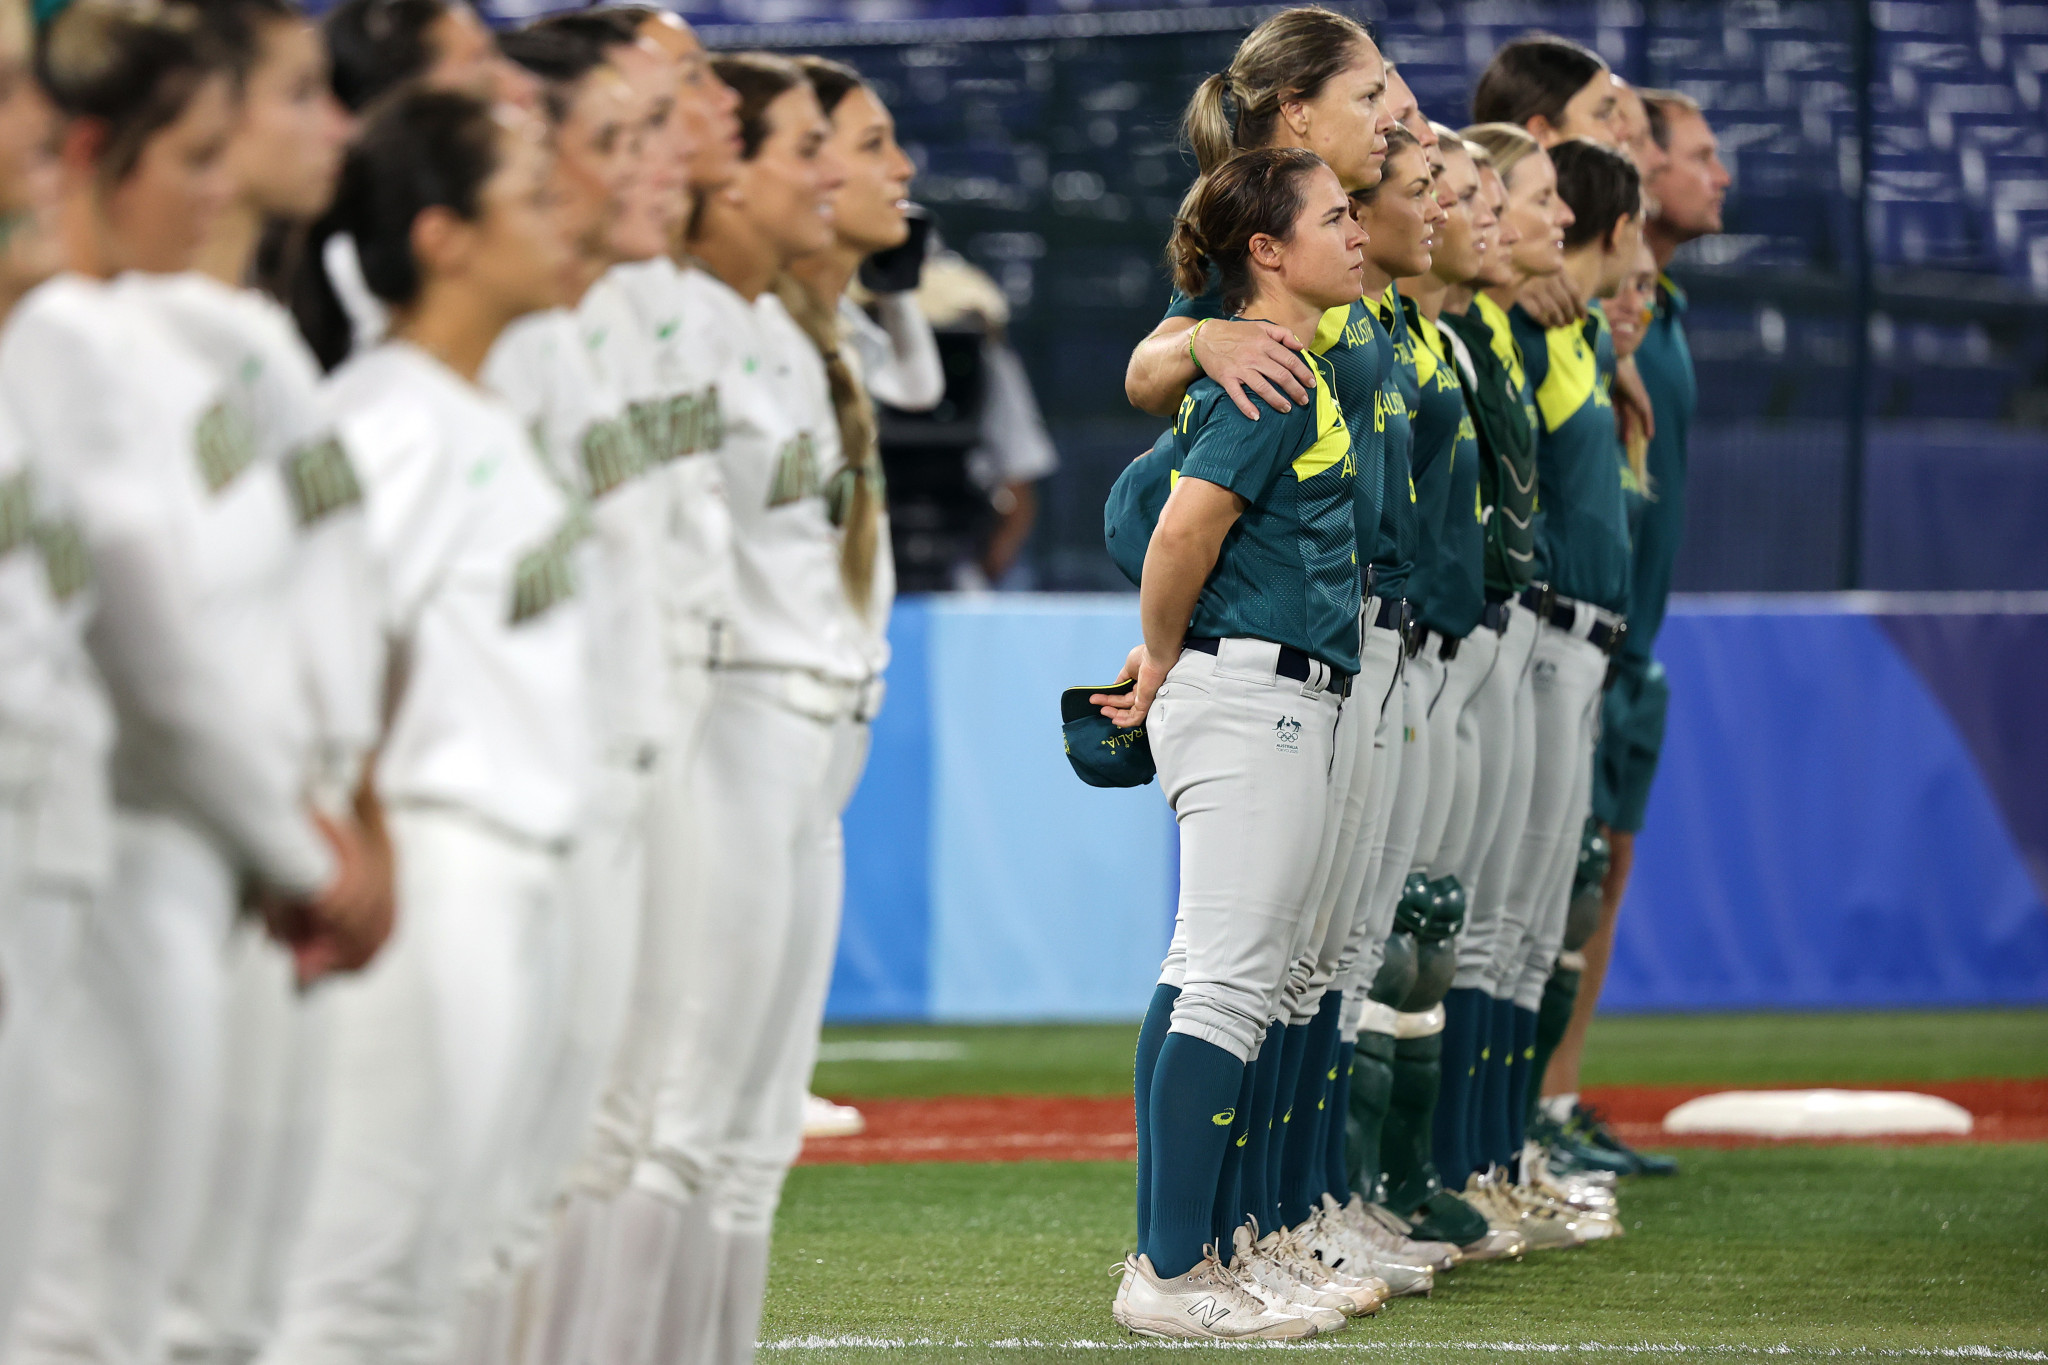 Australia's women's team placed fifth in the softball competition at the Tokyo 2020 Olympics ©Getty Images